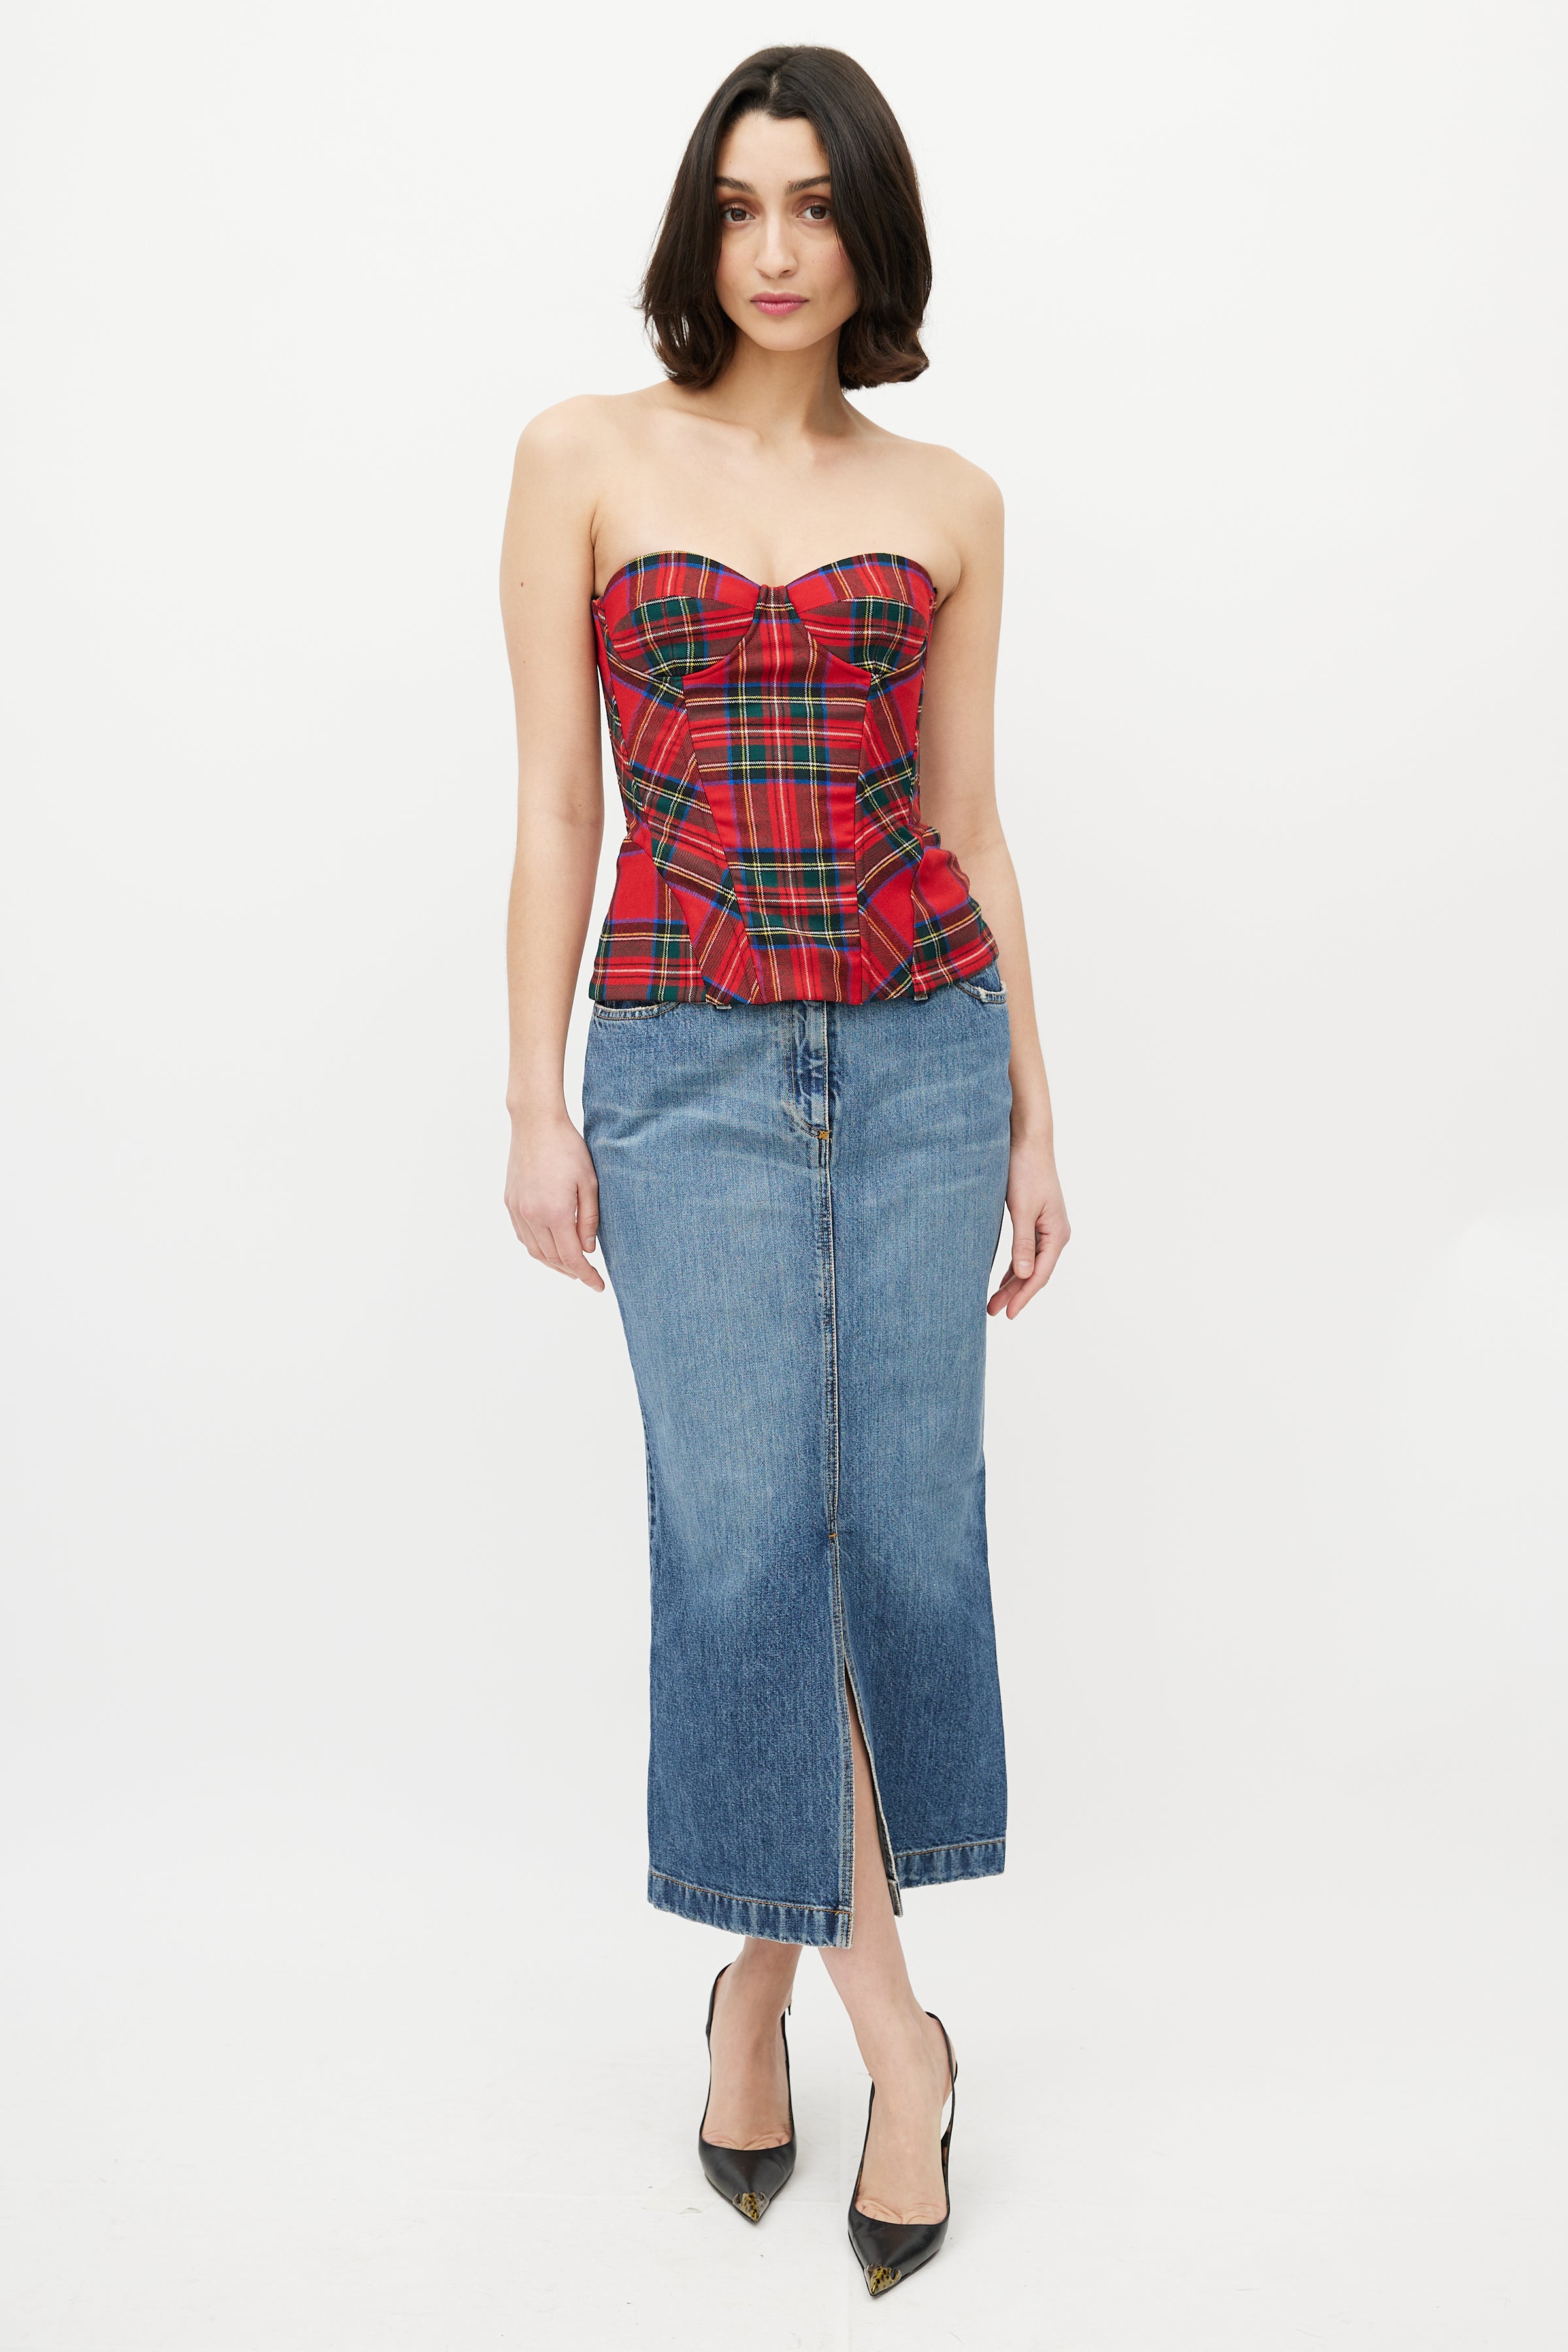 Dolce & Gabbana // D&G Red & Green Plaid Bustier – VSP Consignment